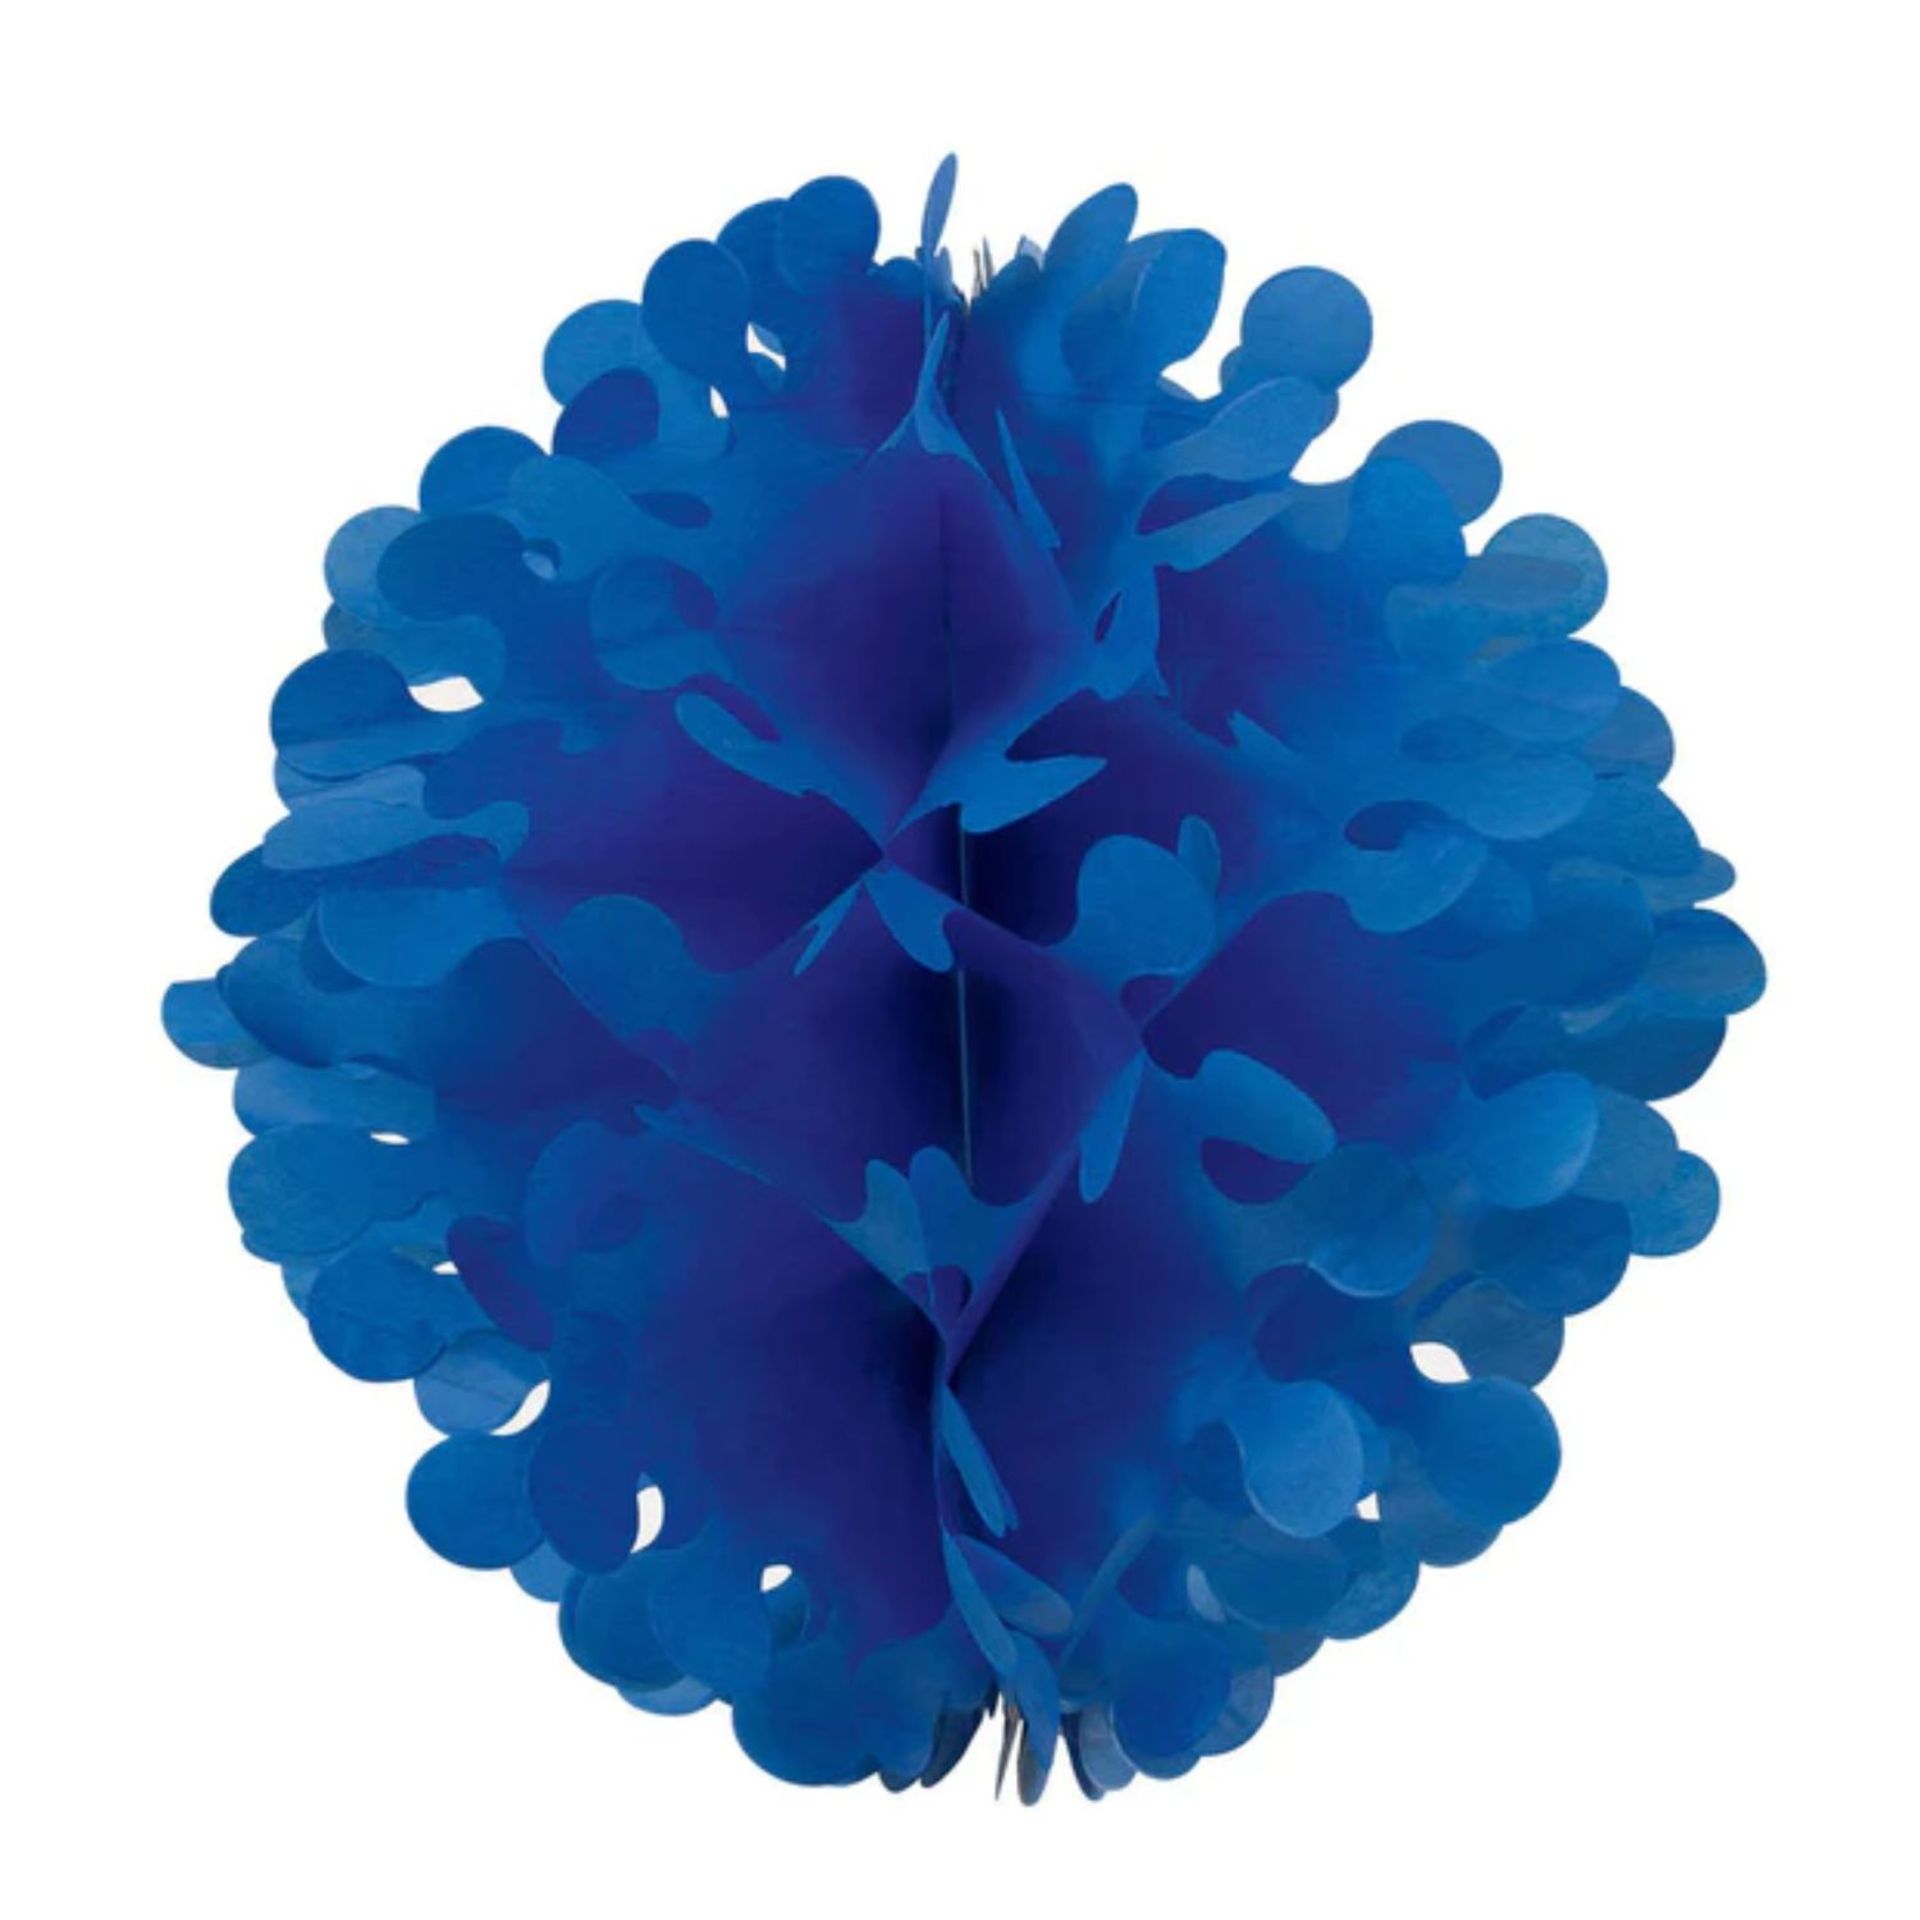 1000 PARTY SUPPLIES 12" FLUTTER TISSUE PAPER BALL - RANGE OF COLOURS, RRP £10,000 - Image 7 of 9